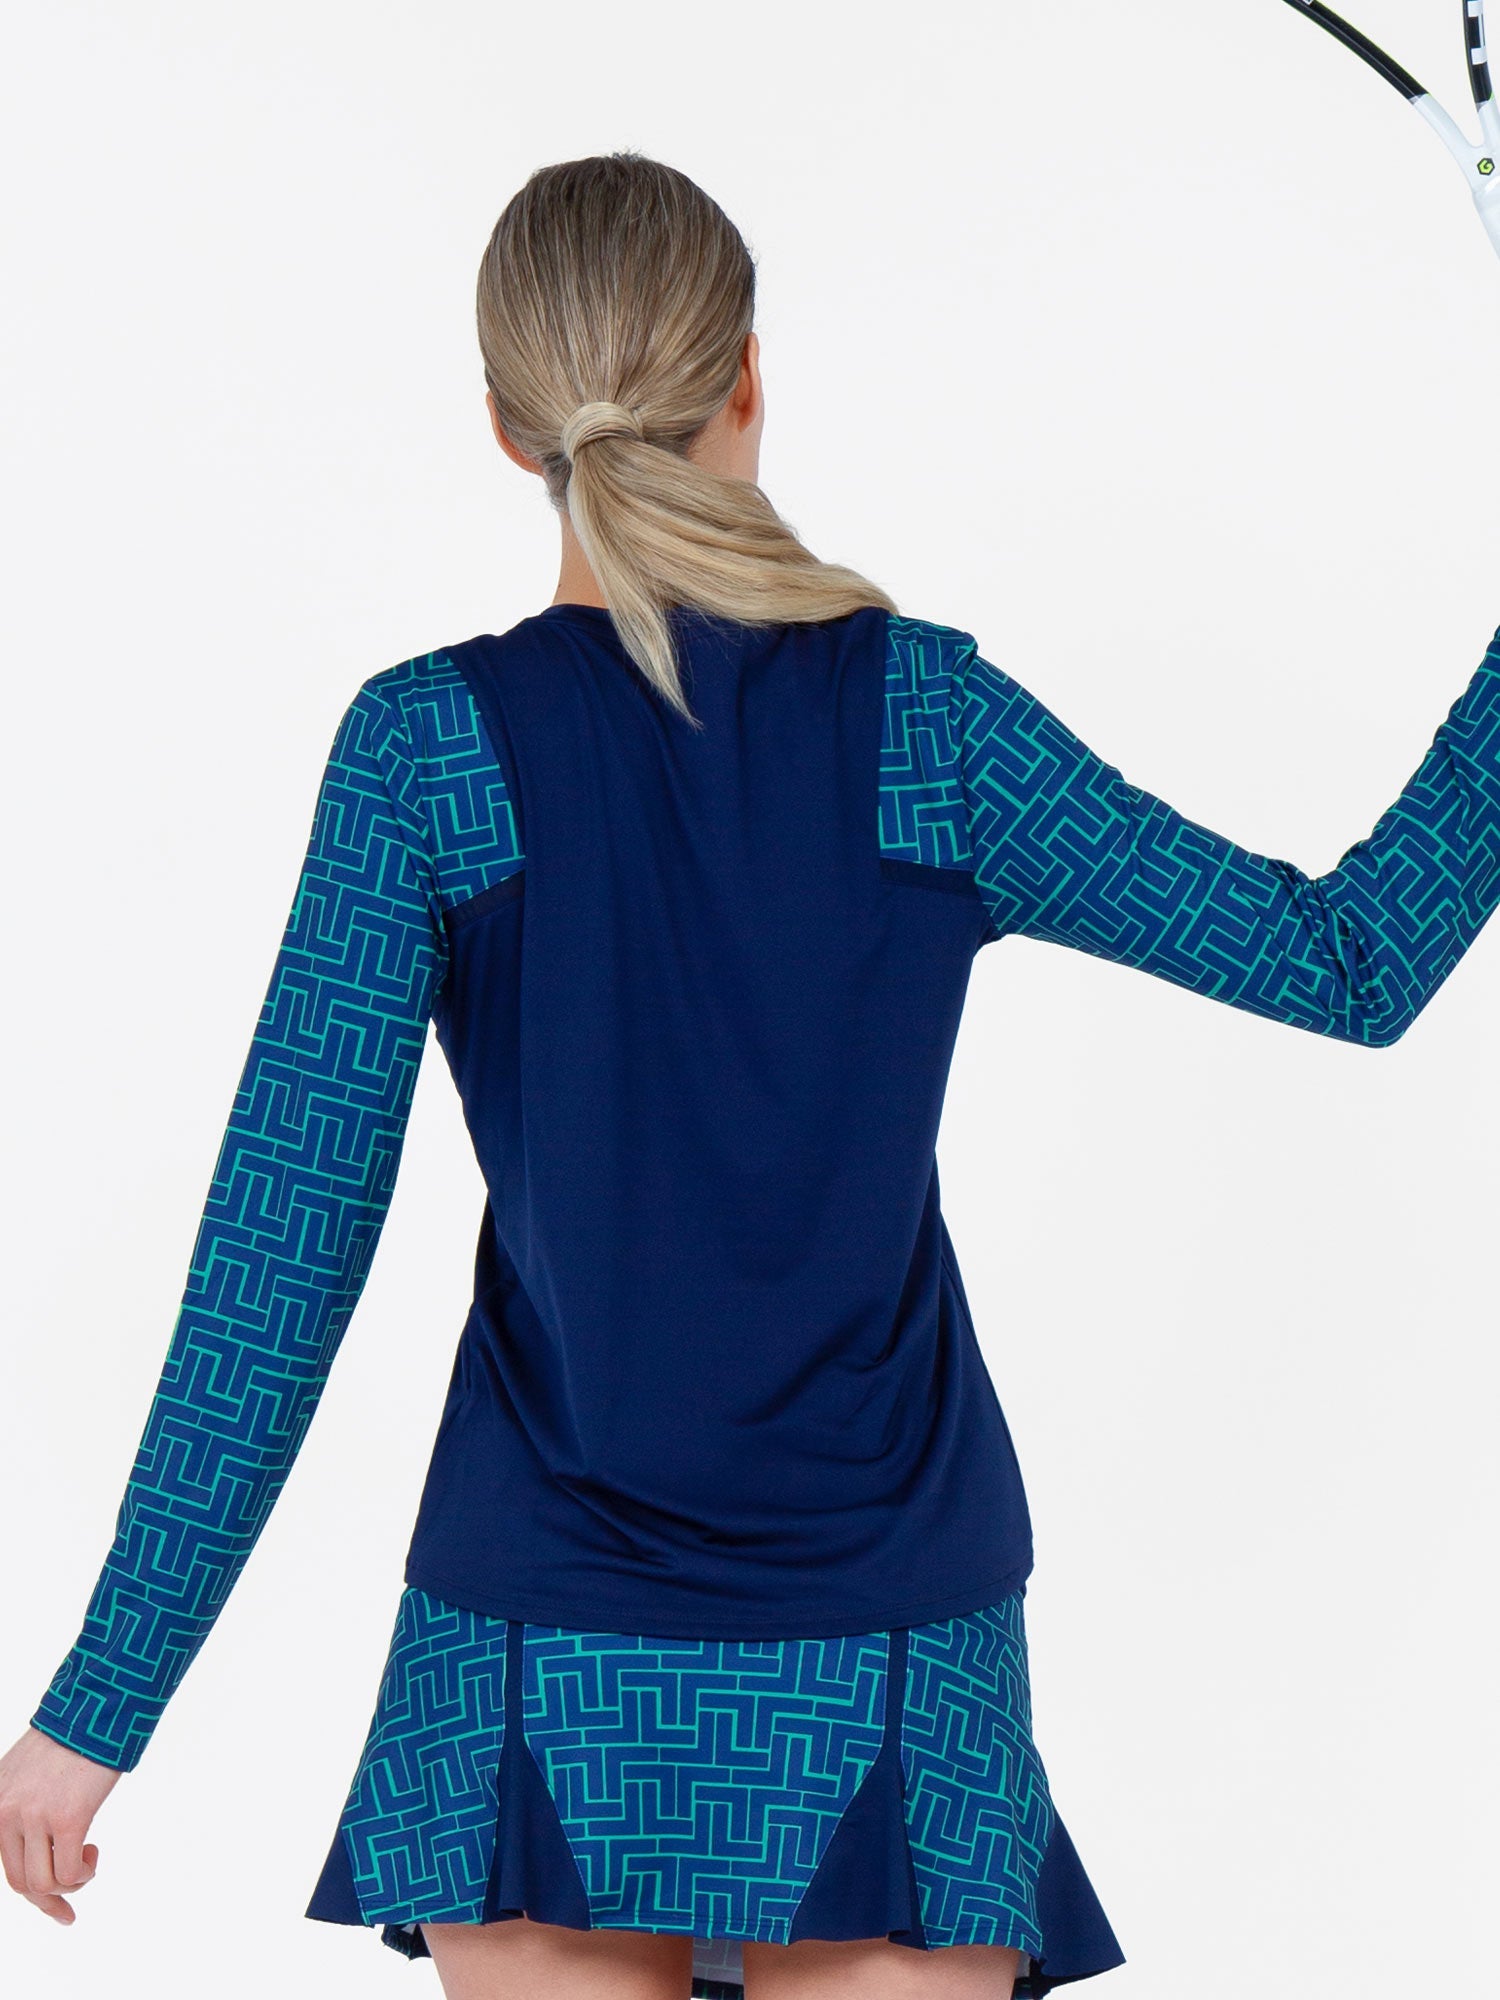 Colorblock Active Sofia Long Sleeve Crew Neck - Ink/Ink Tessel